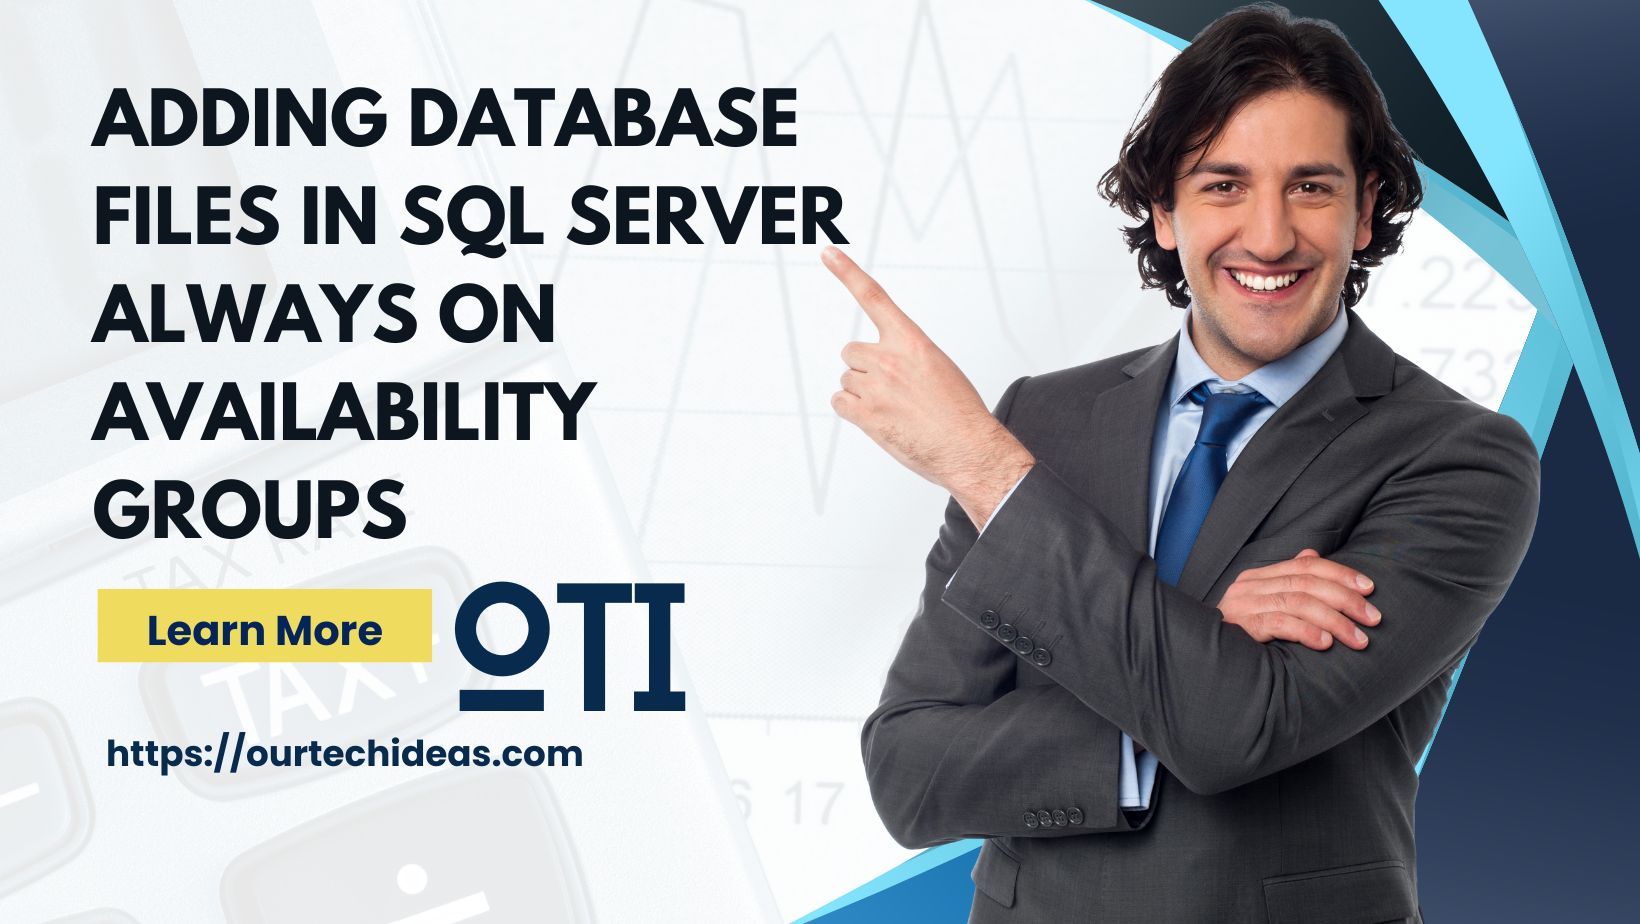 Adding Database Files in SQL Server Always On Availability Groups